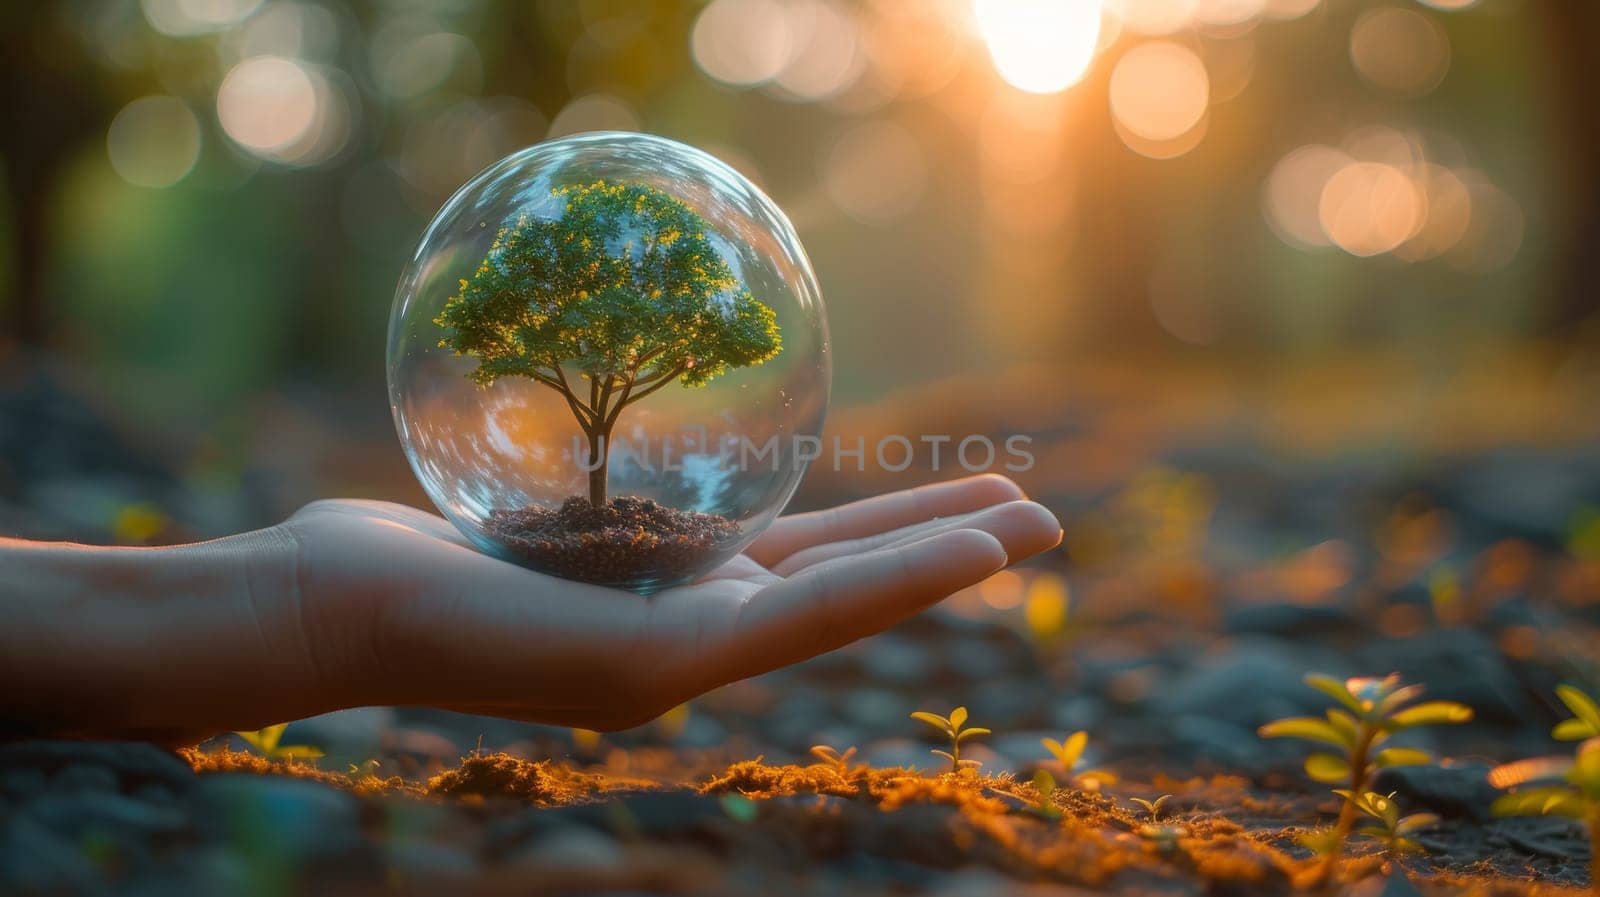 Keeping a glass globe ball in hand while a tree grows and green nature blurs behind it. Eco concept.